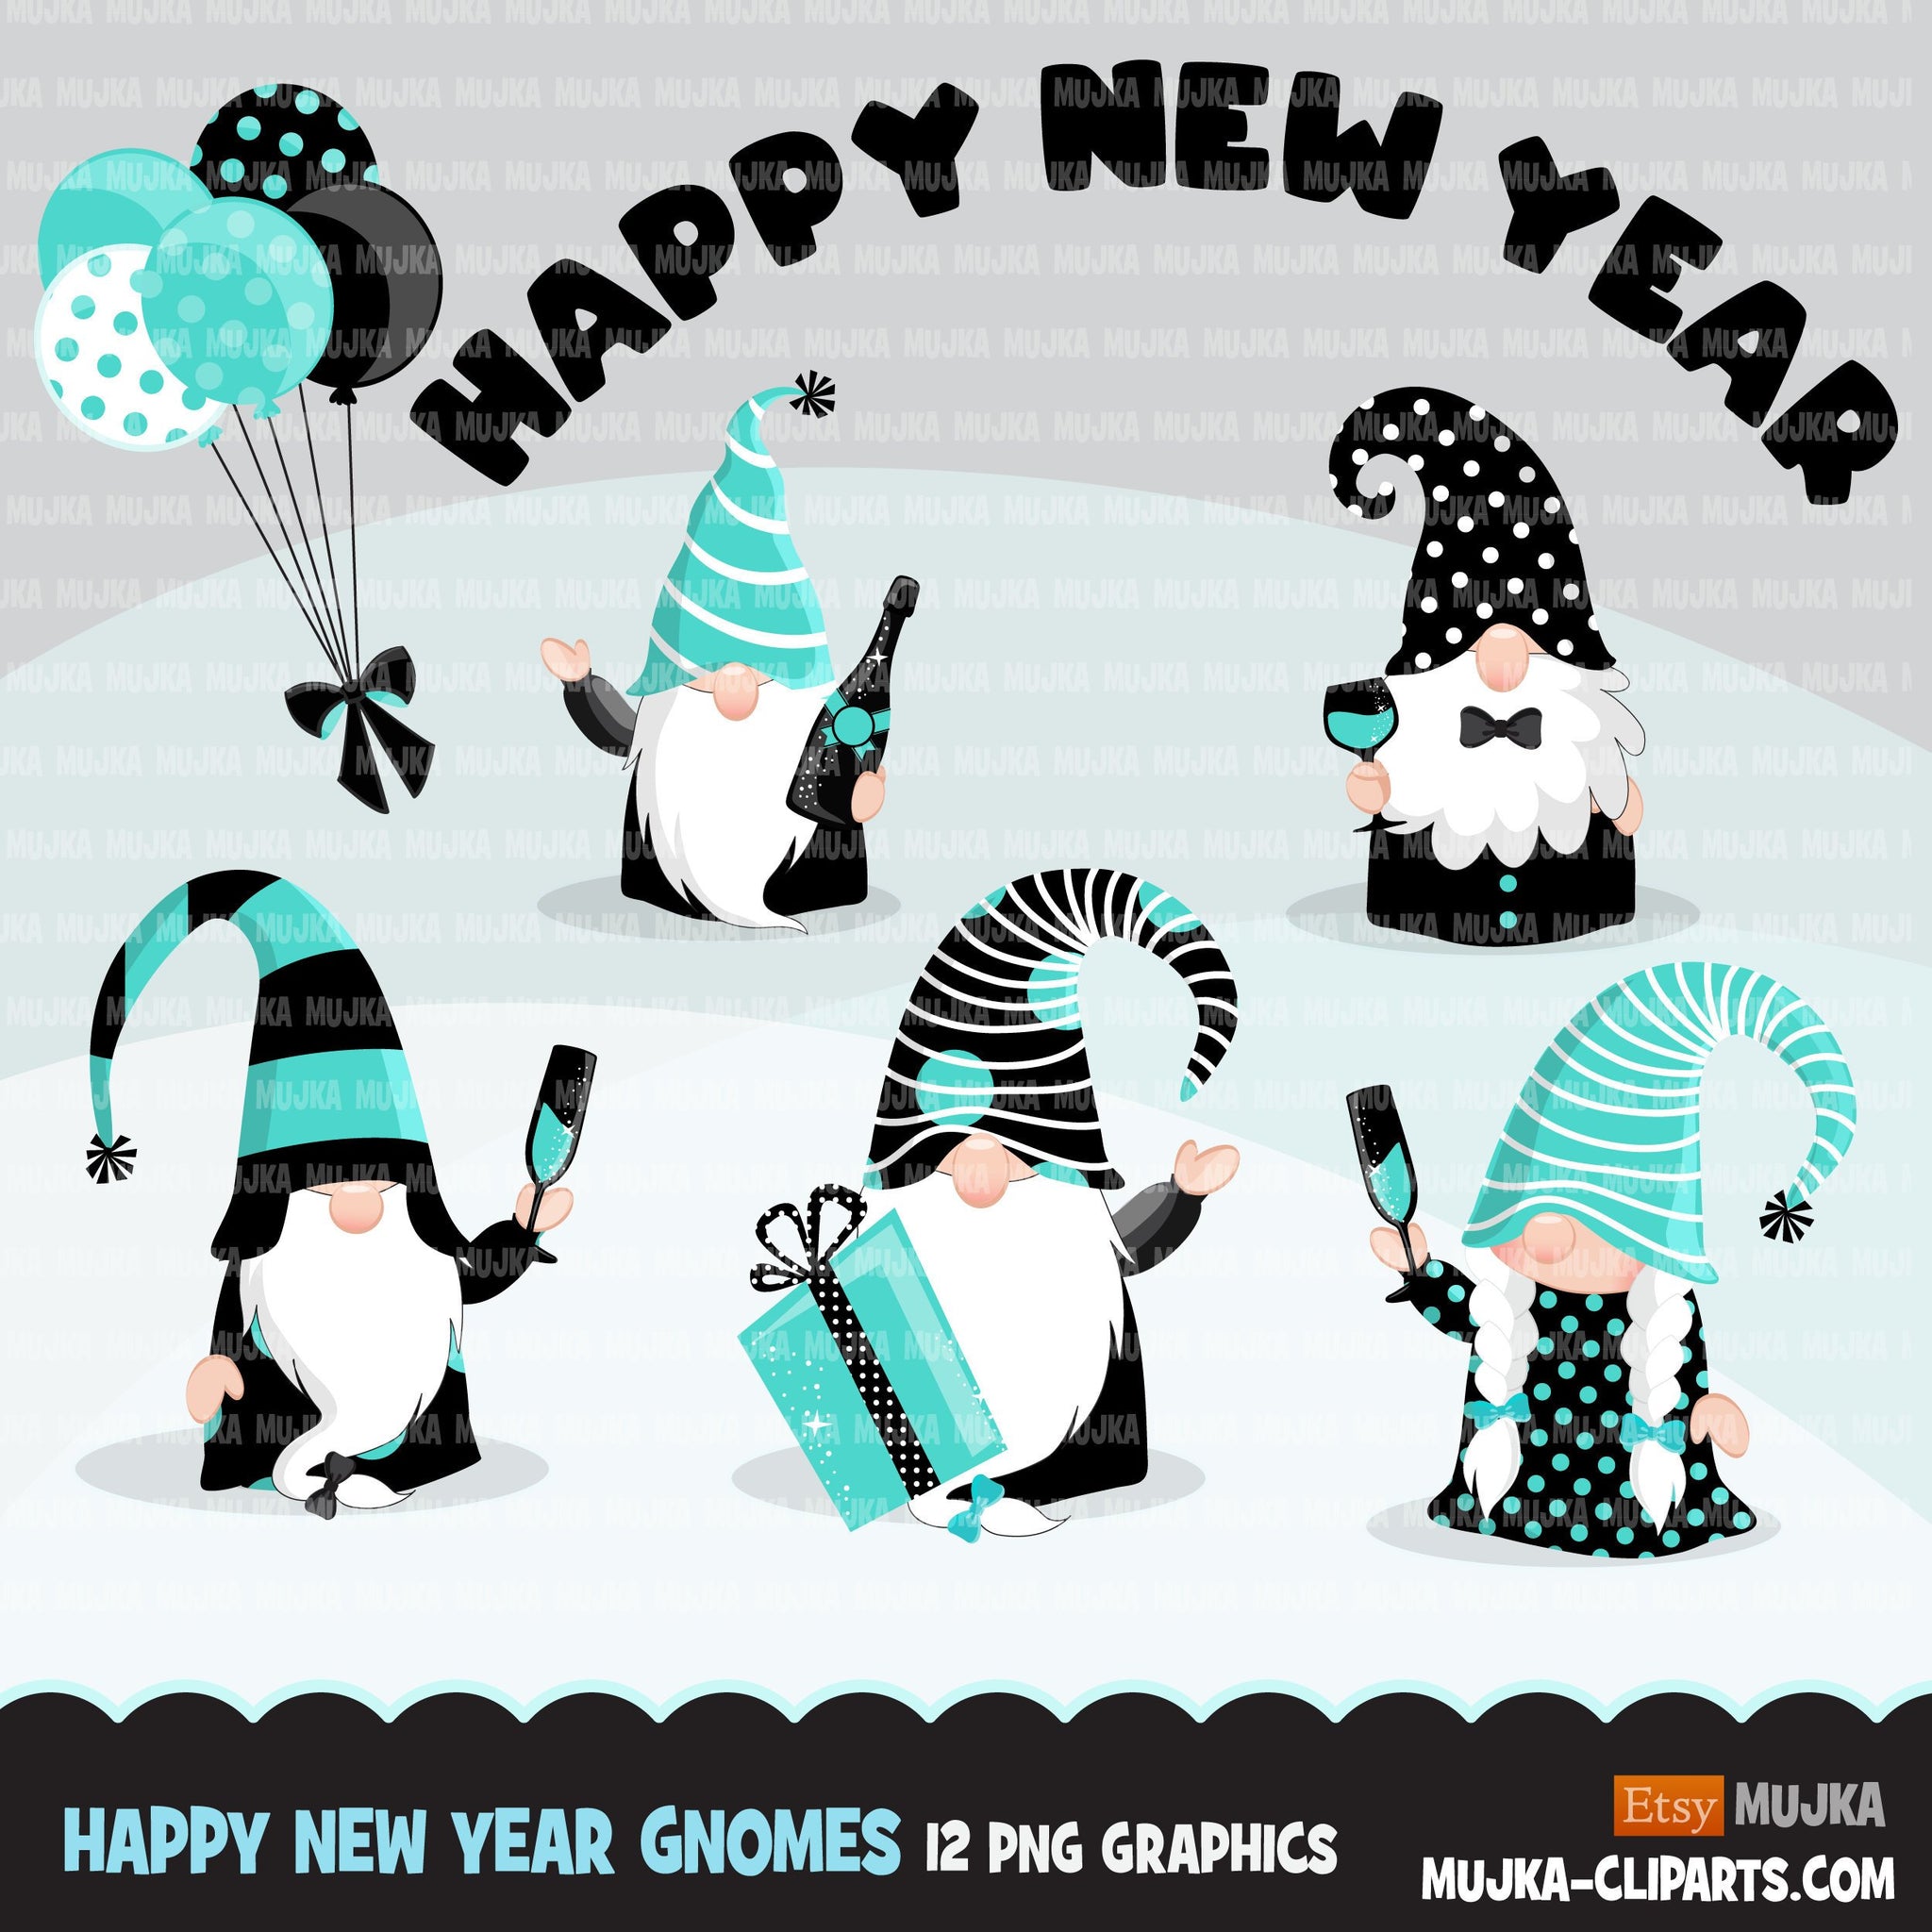 Gnome Clipart, happy New year graphics, celebrating gnomes, balloons, champagne png commercial use teal black